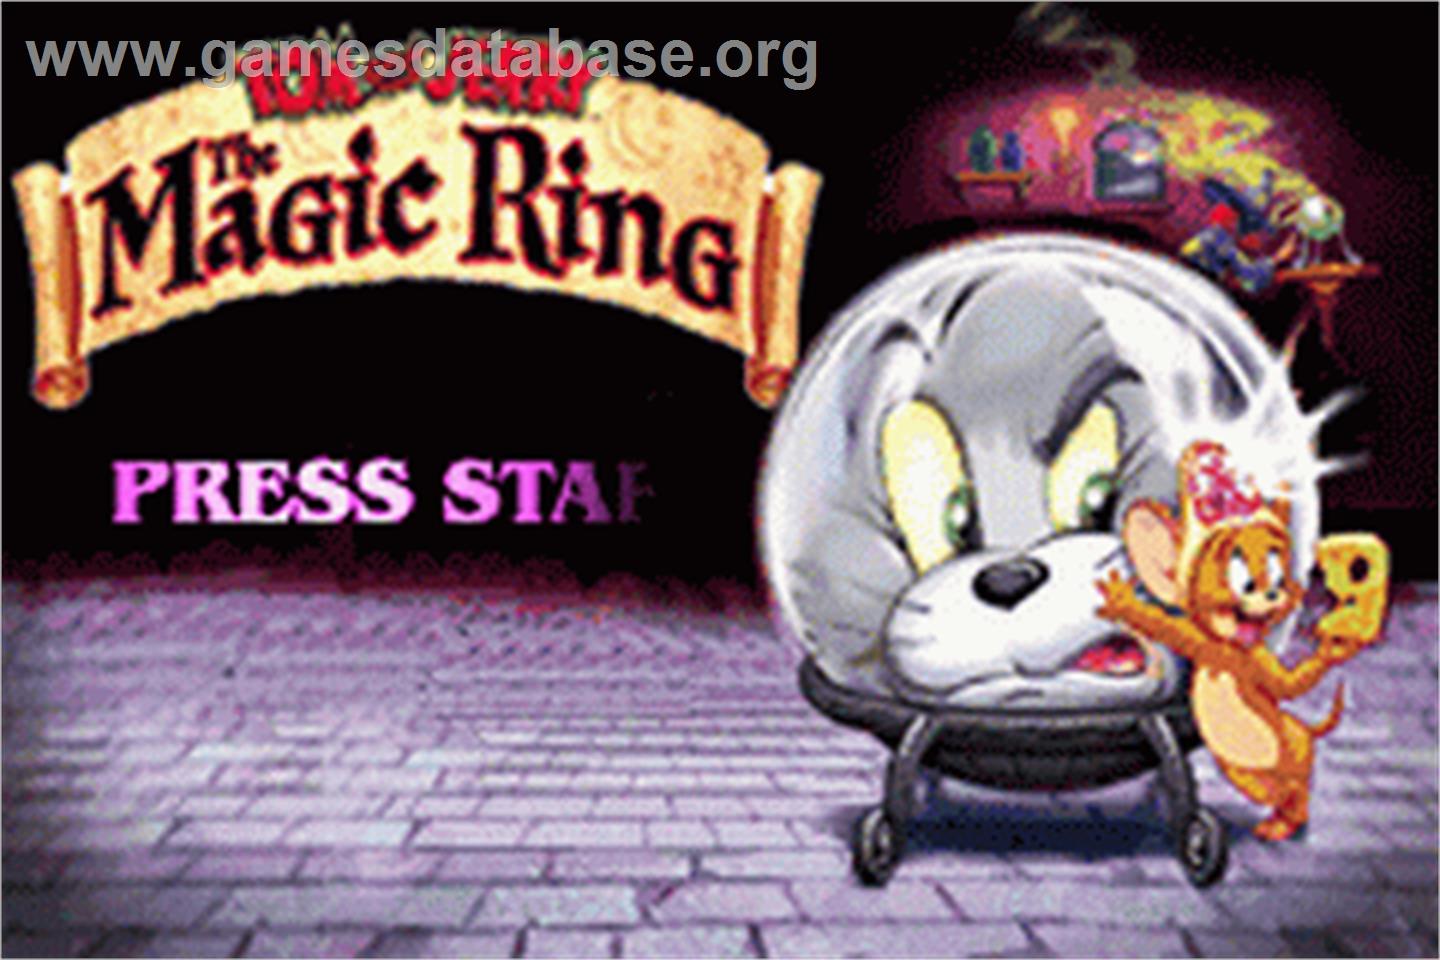 Tom and Jerry: The Magic Ring - Nintendo Game Boy Advance - Artwork - Title Screen